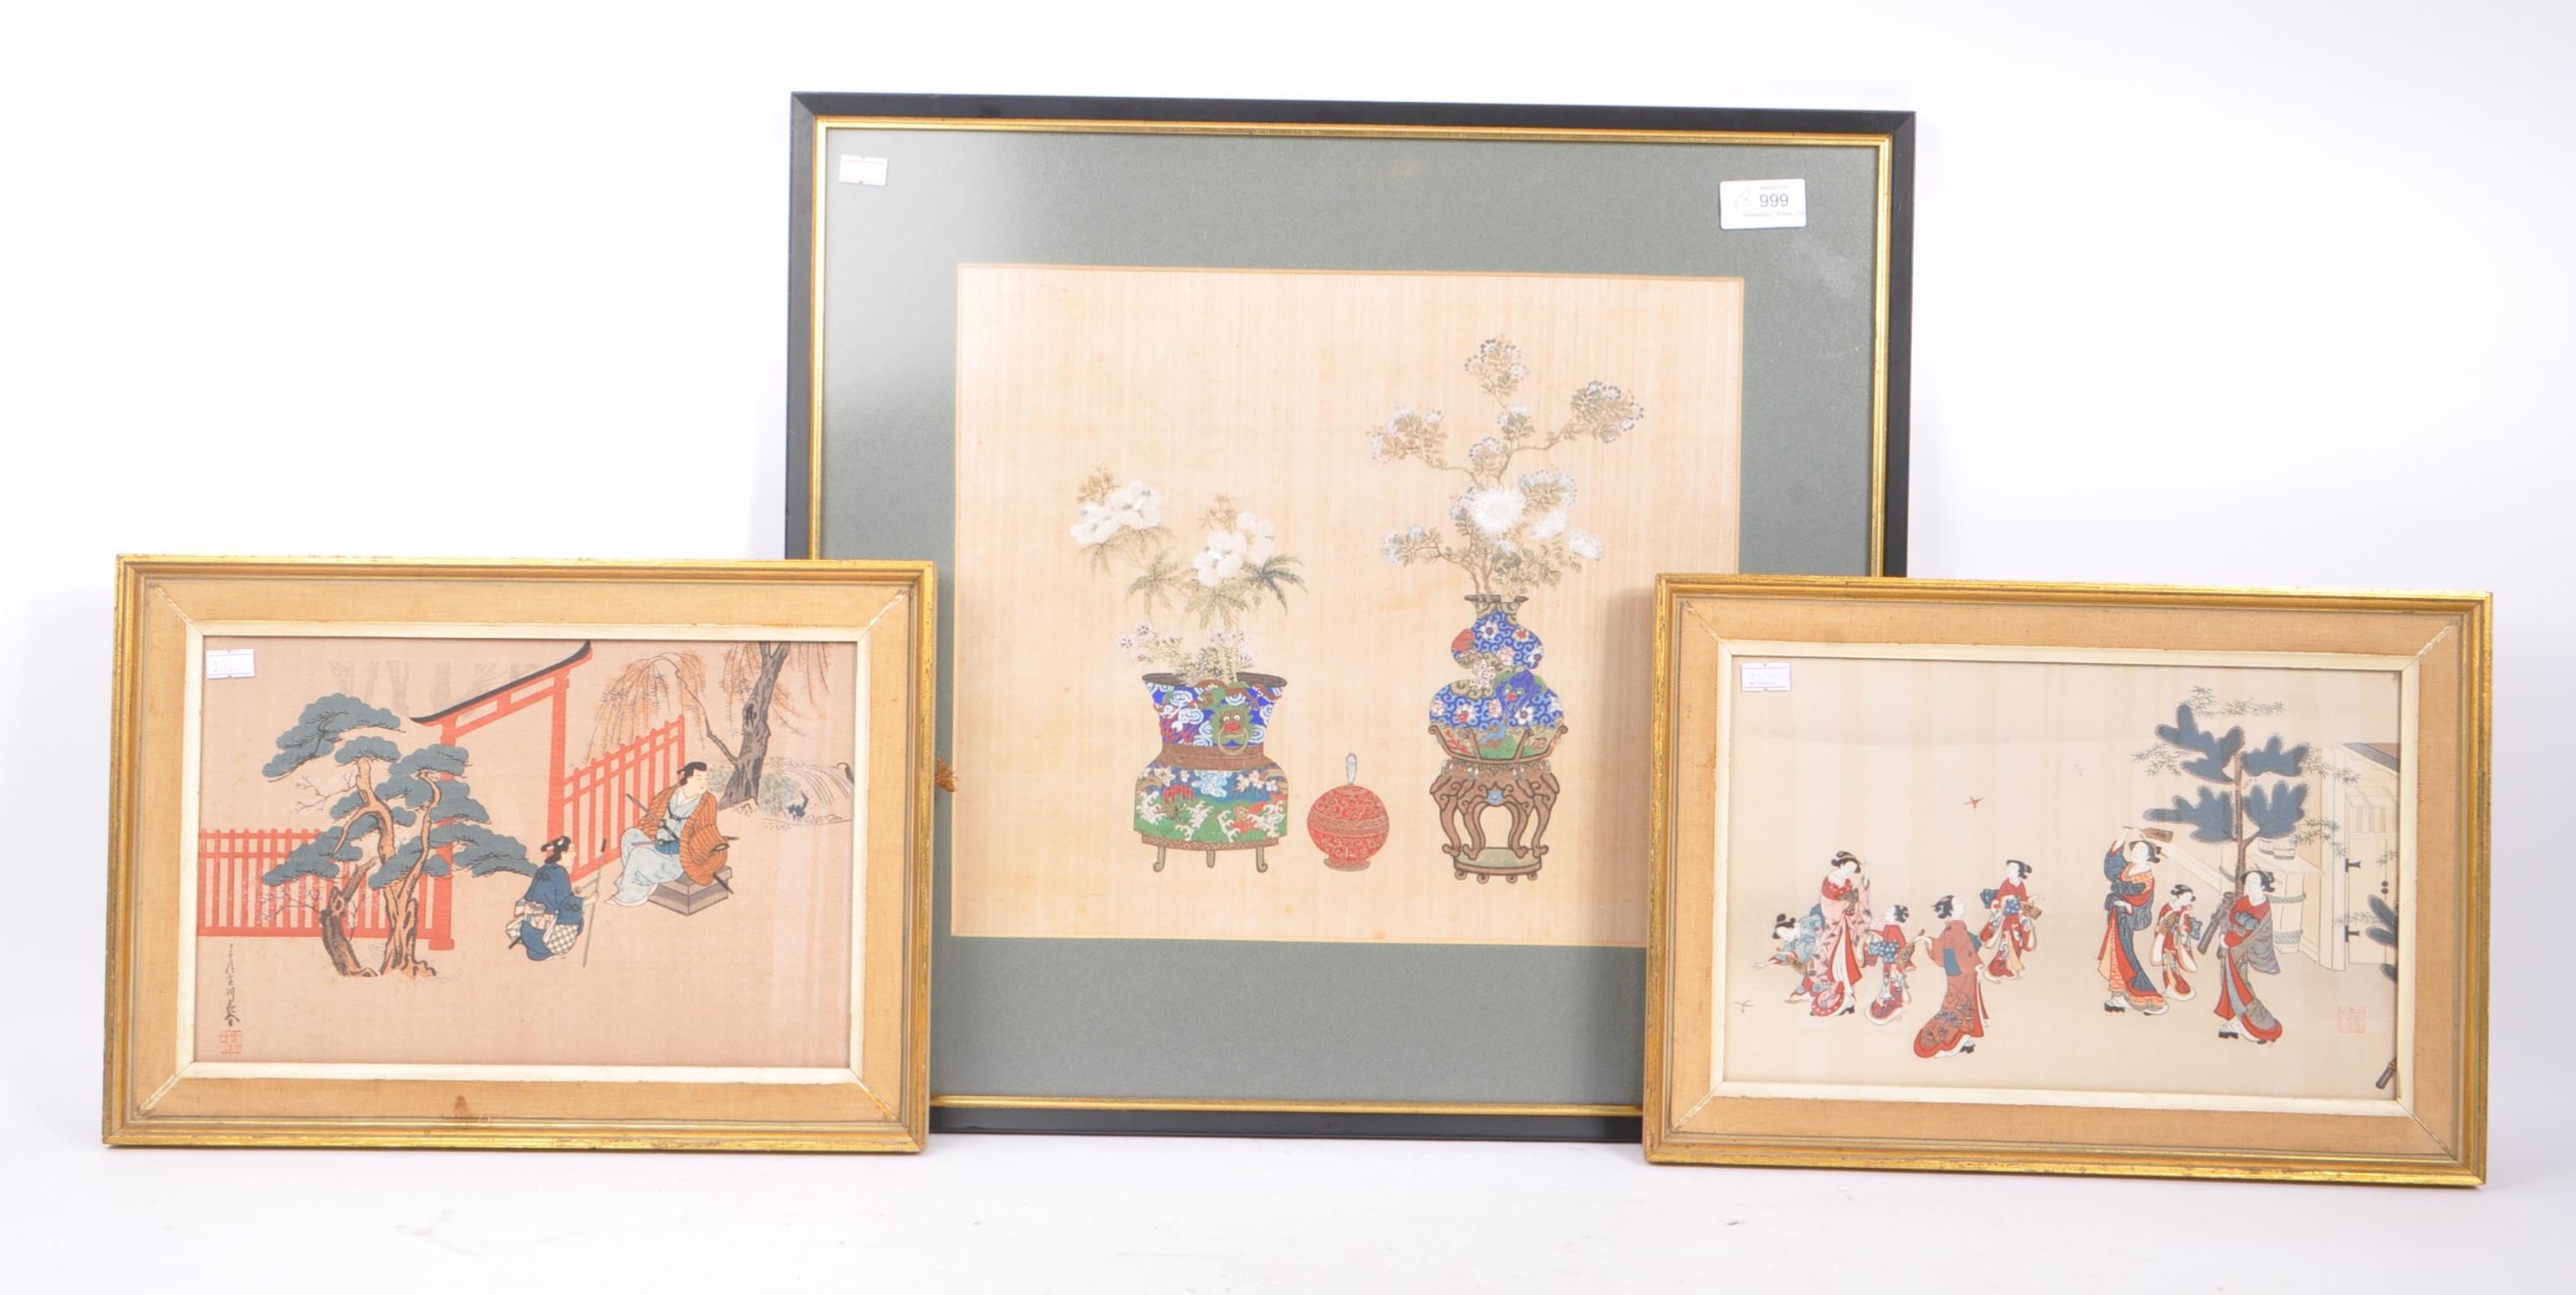 TWO 19TH CENTURY CHINESE AND JAPANESE PAINTINGS ON SILK